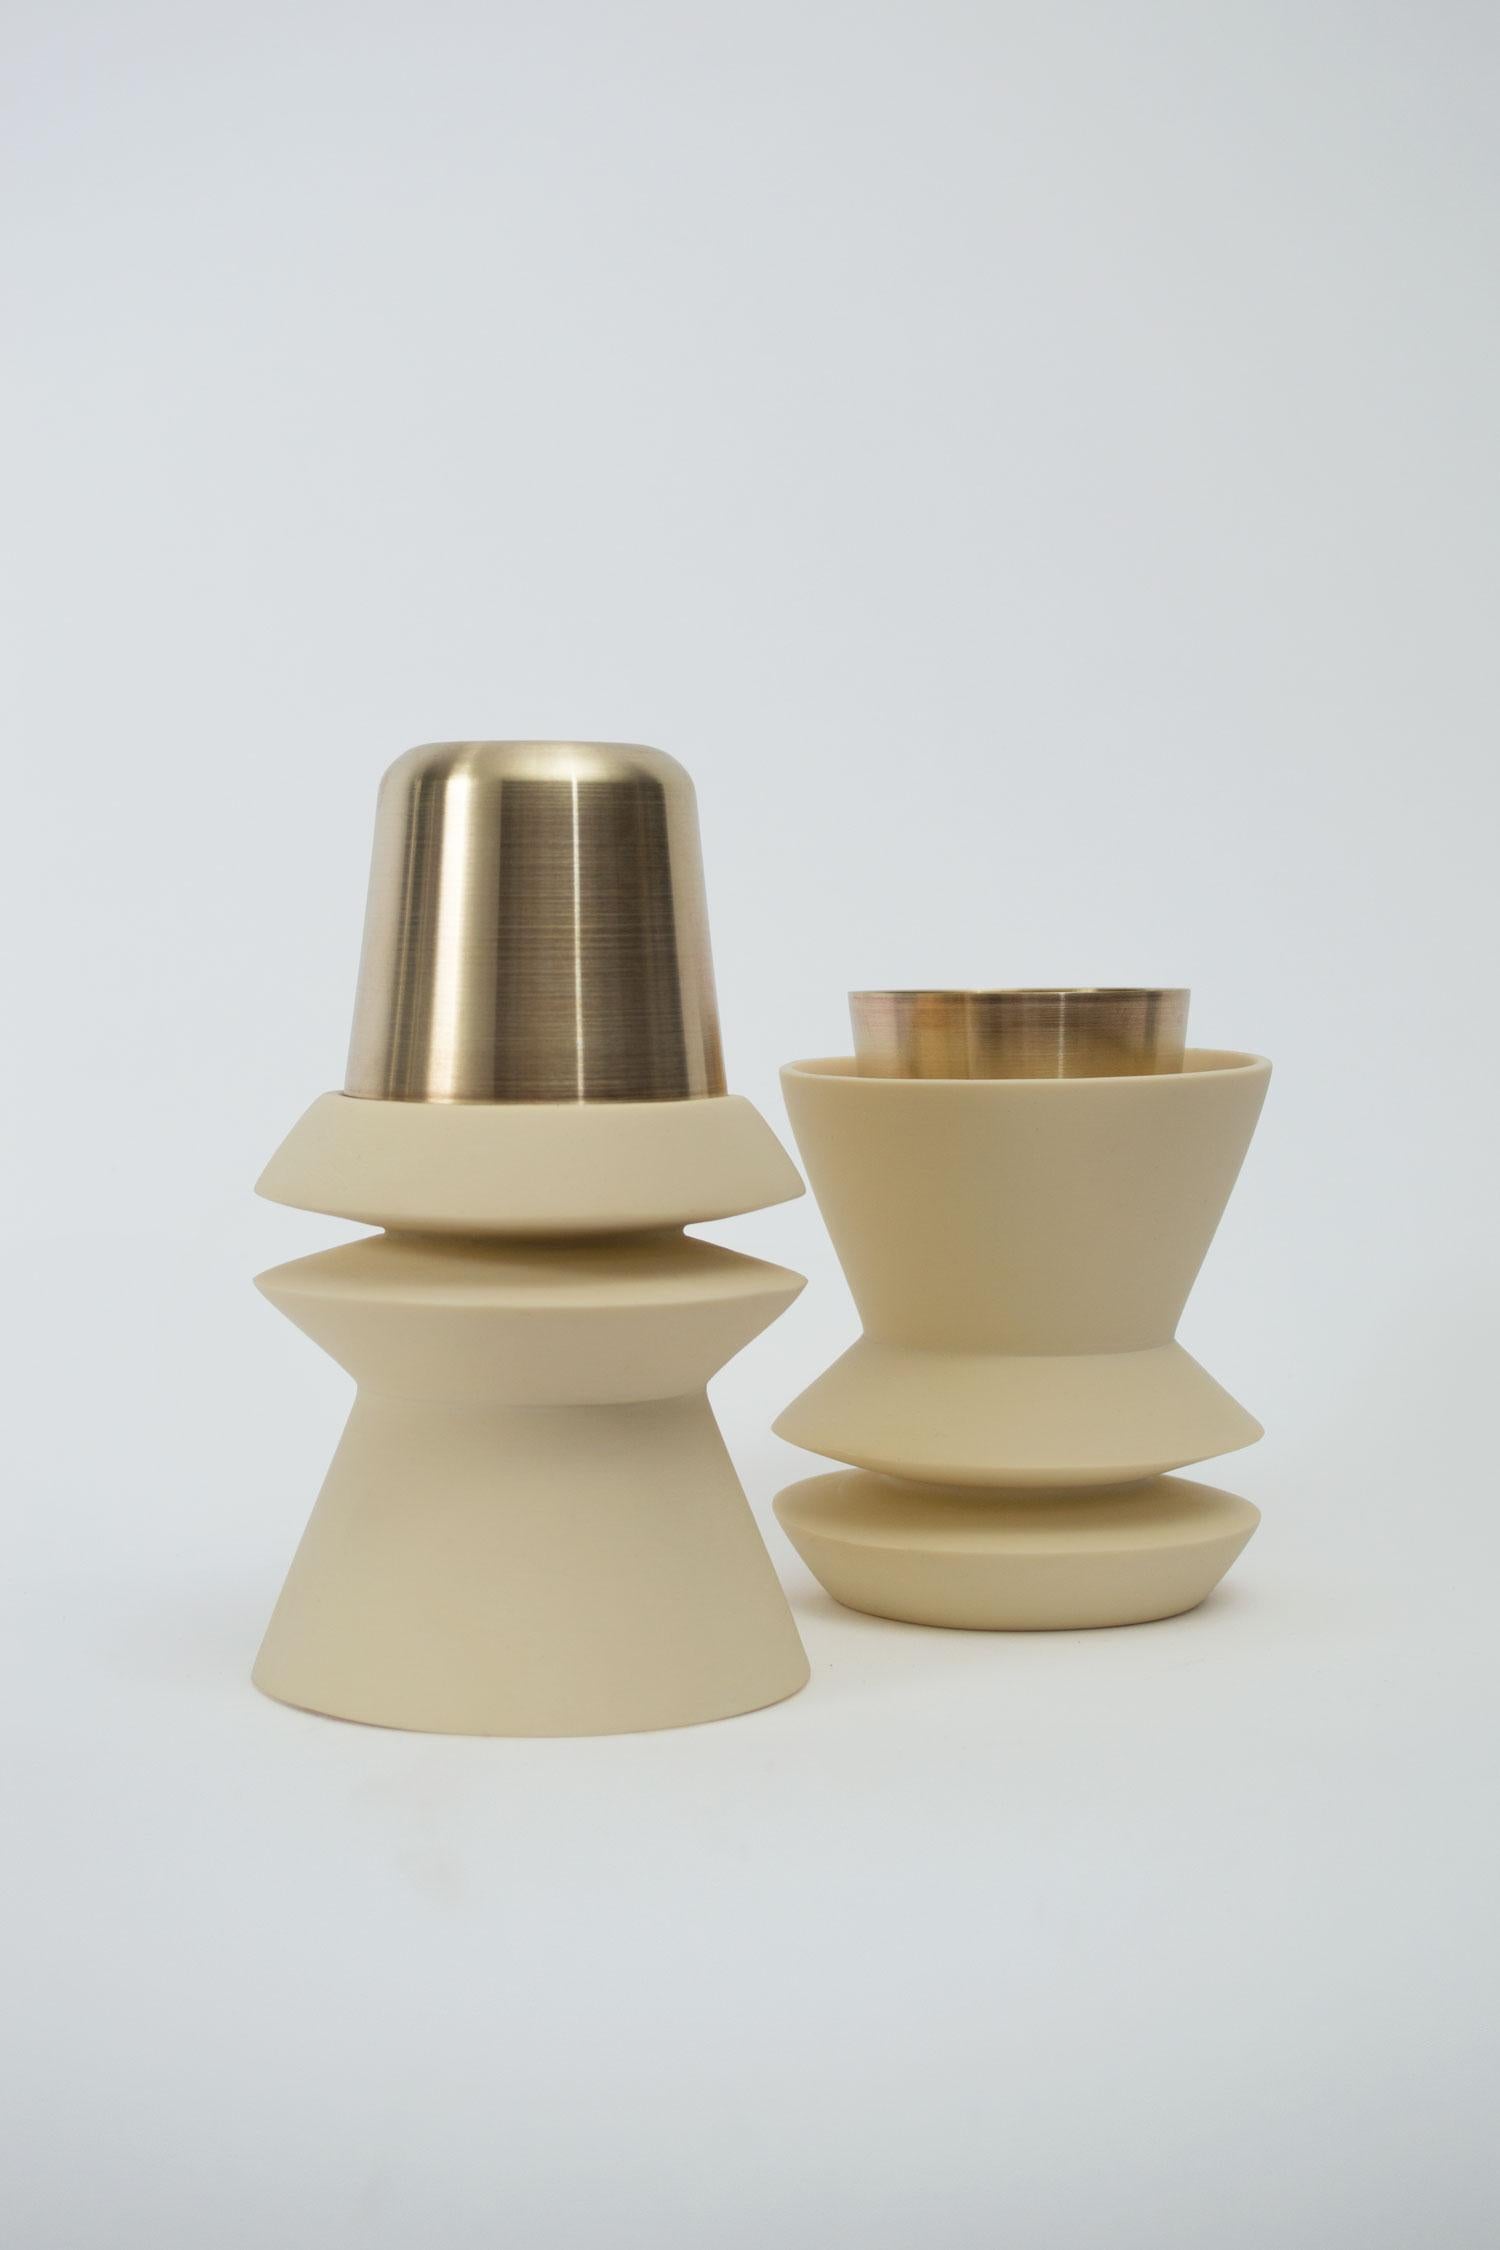 Part of ACOOCOORO’s Ceremonia special series, Copaleras (incense burners) create a play between their soft appearance, their ceremonial function and their ambiguous materiality, moulded in resin and turned brass. They suggest the presence of magical